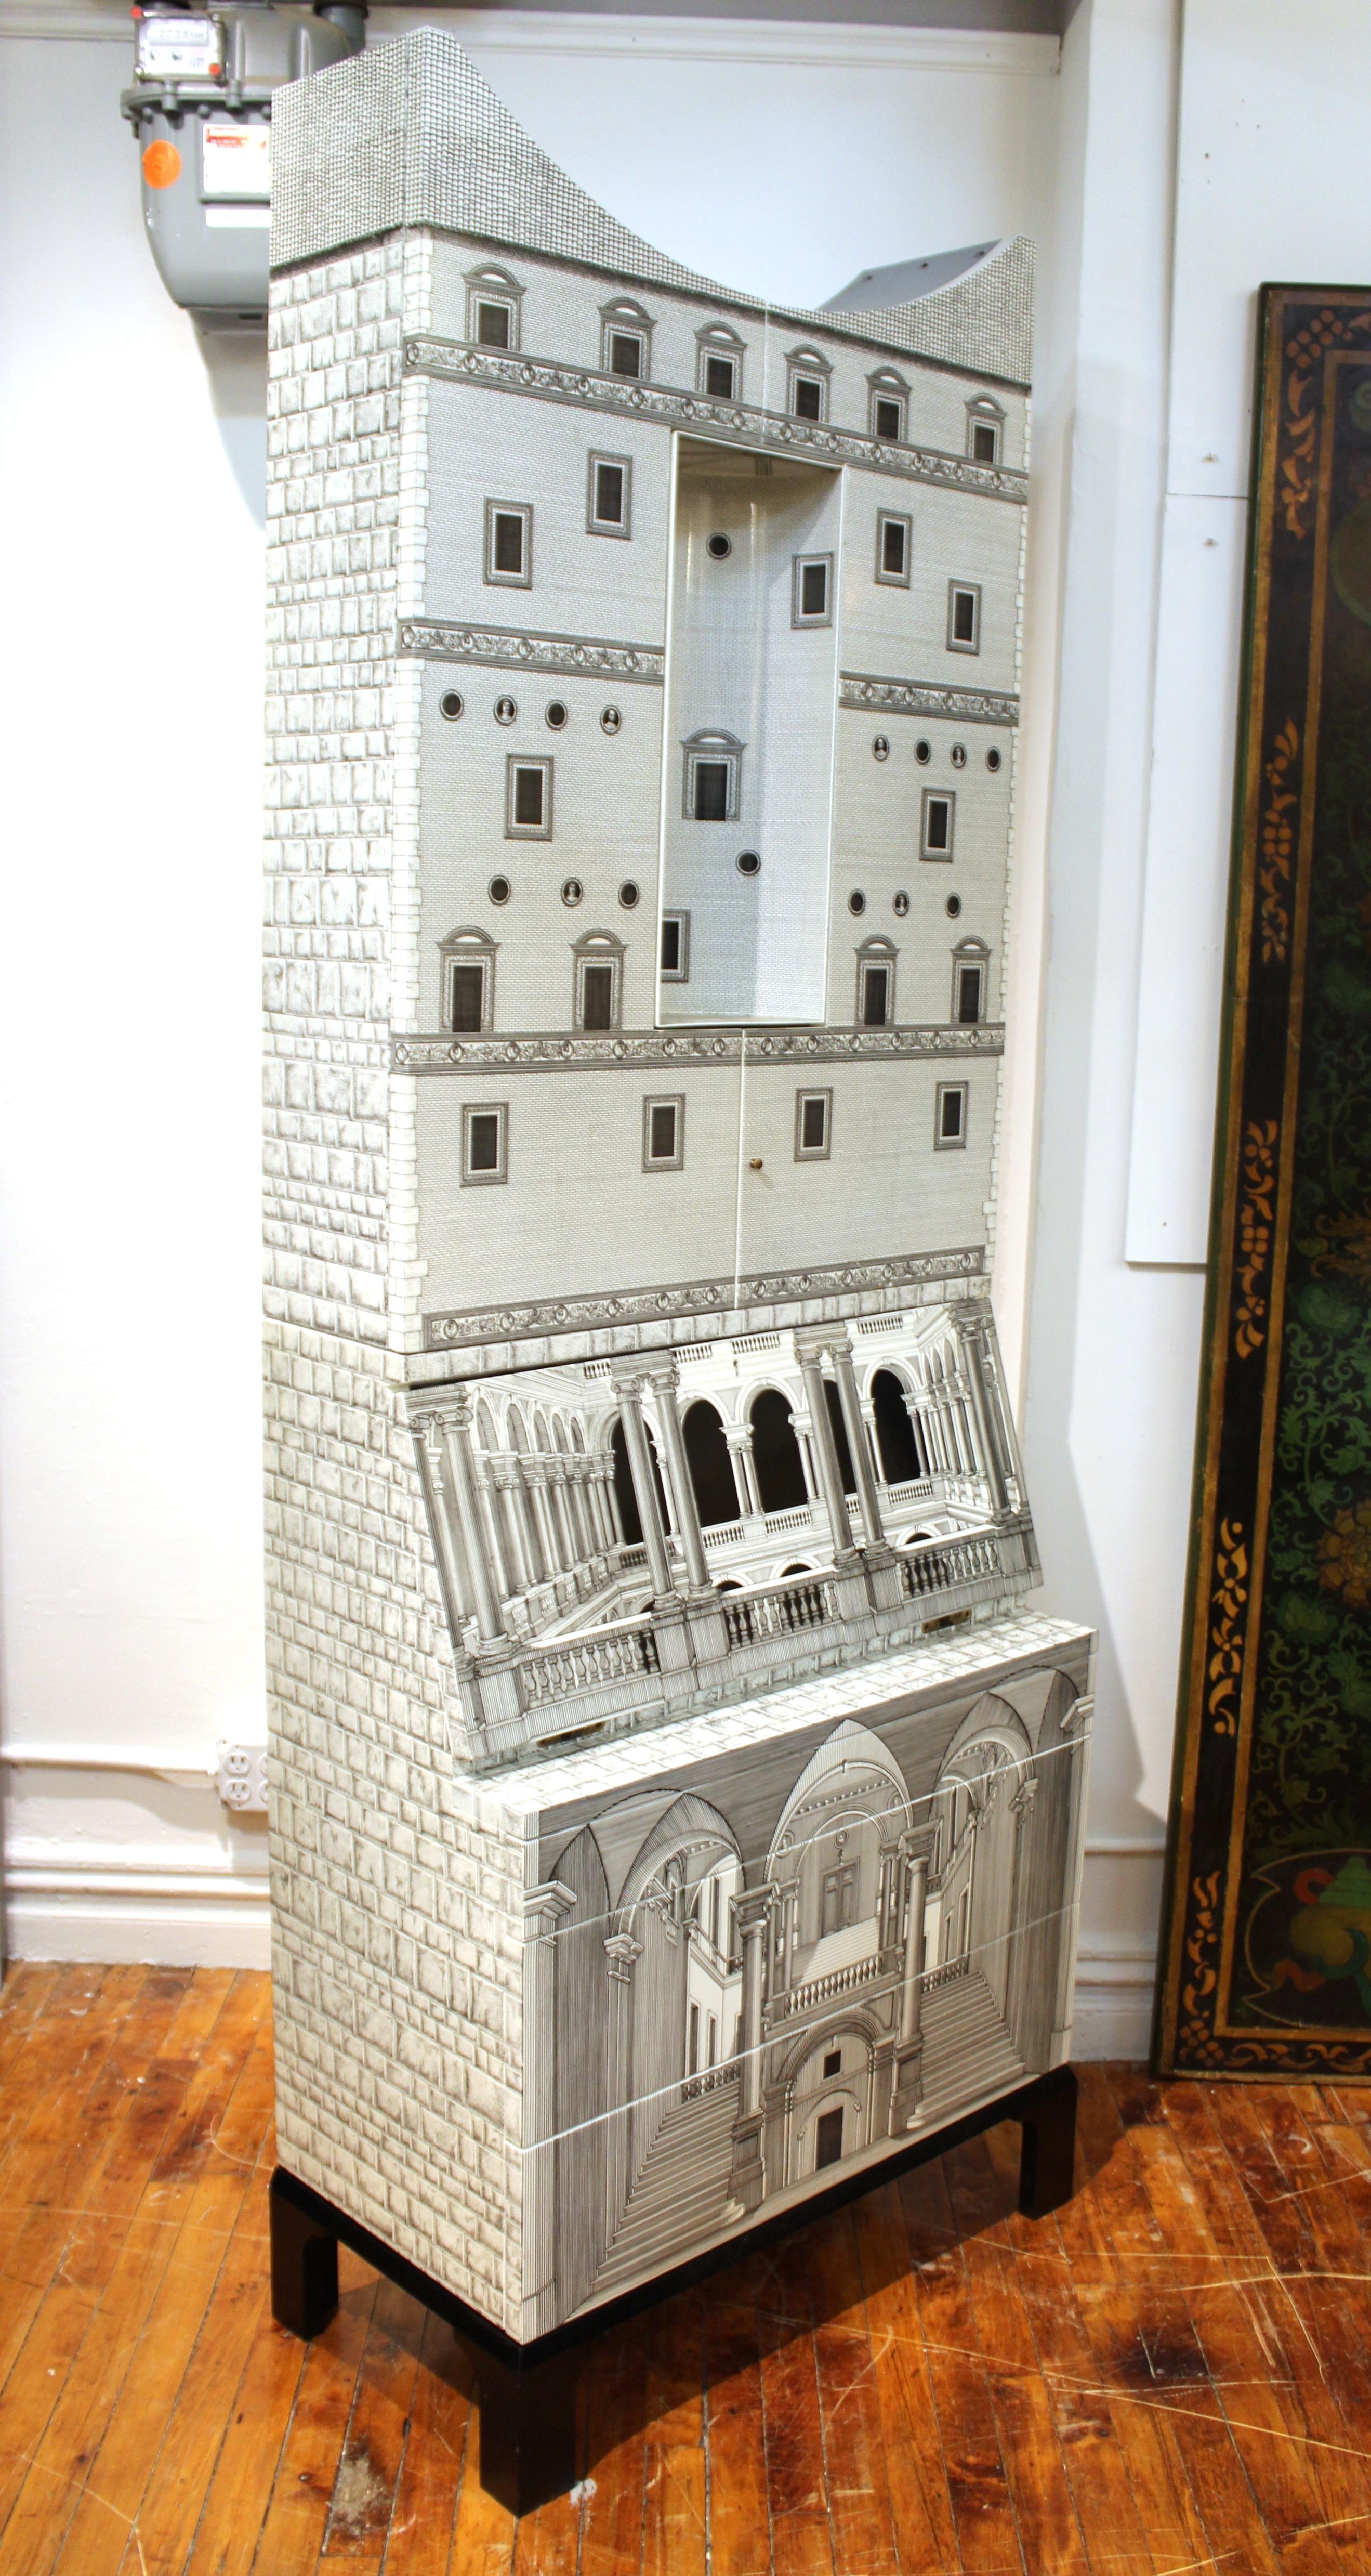 Italian modern Fornasetti 'Architettura' trumeau with concave top and illuminated niche. The piece has a wooden structure, lacquered and printed with 18th century inspired lithographs of Italian palaces such as the Alessi Palace in Genoa.
This